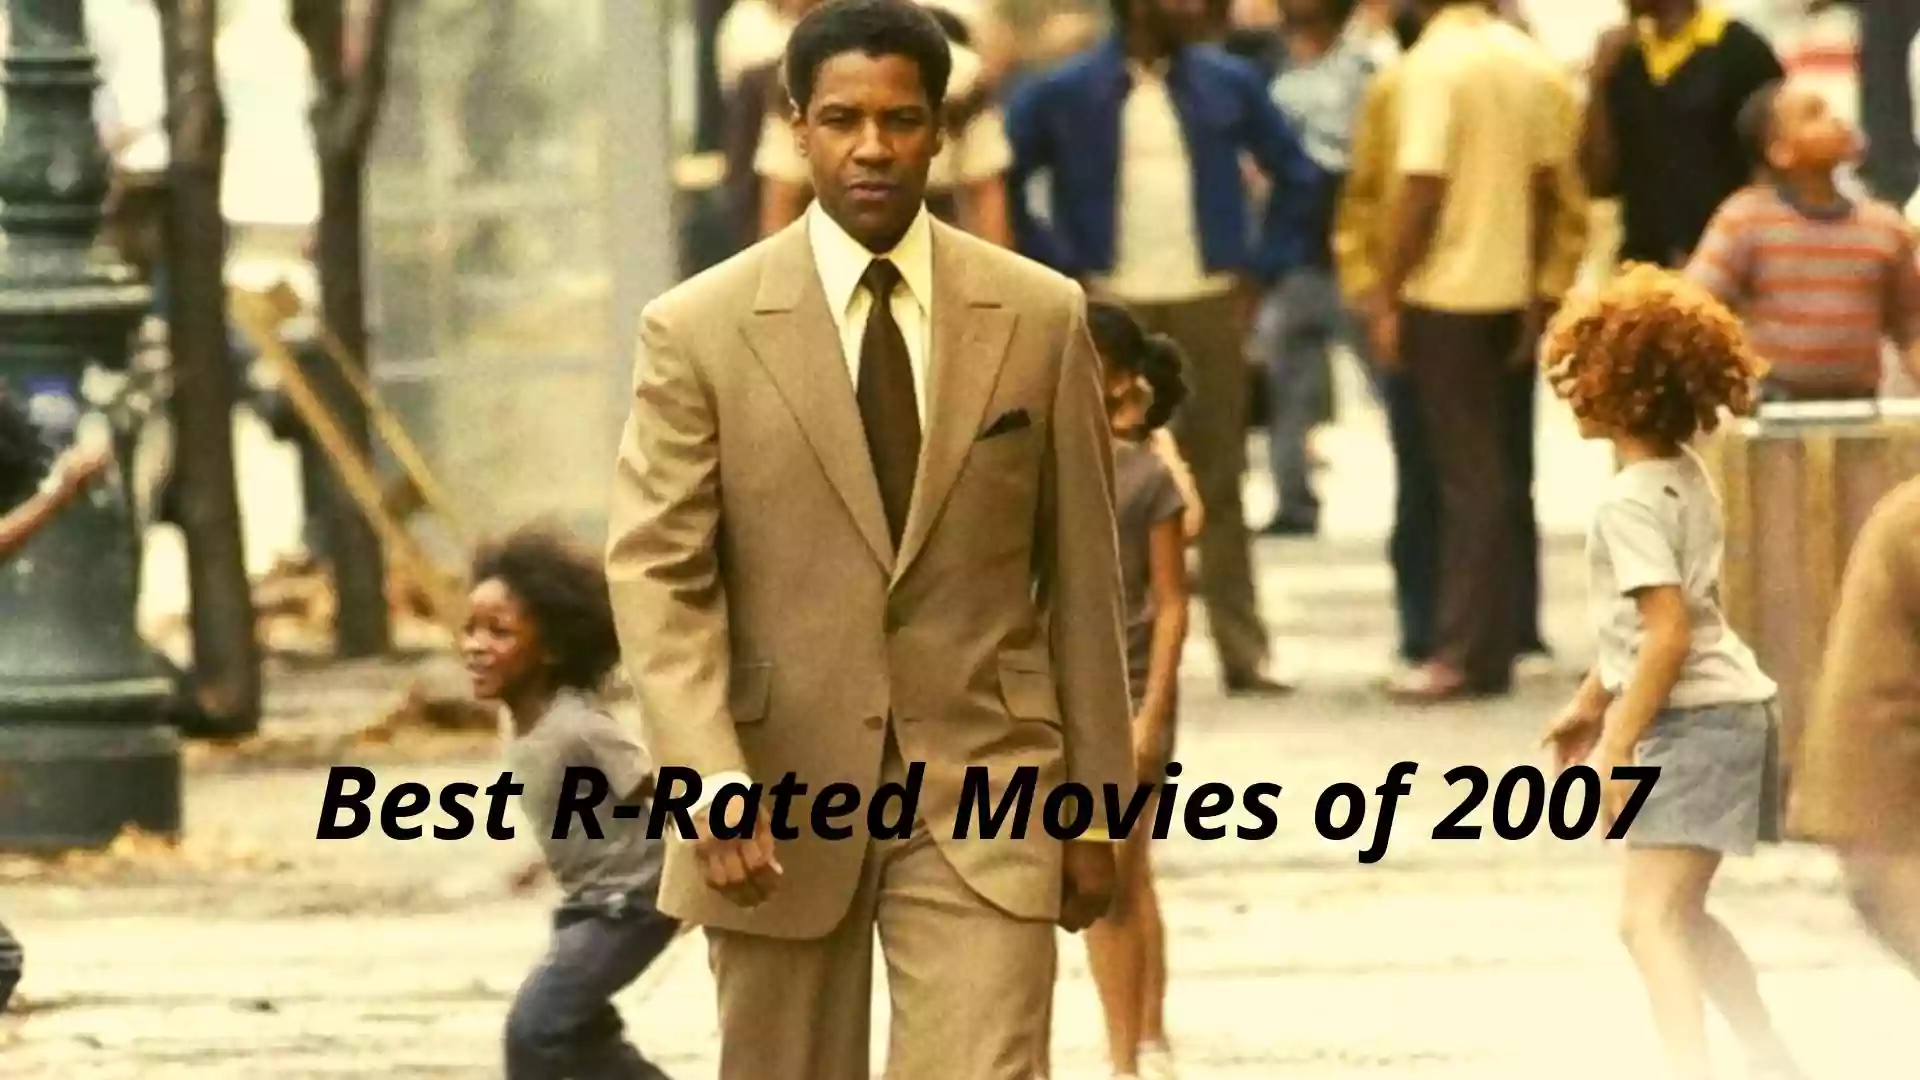 Best R-Rated Movies of 2007